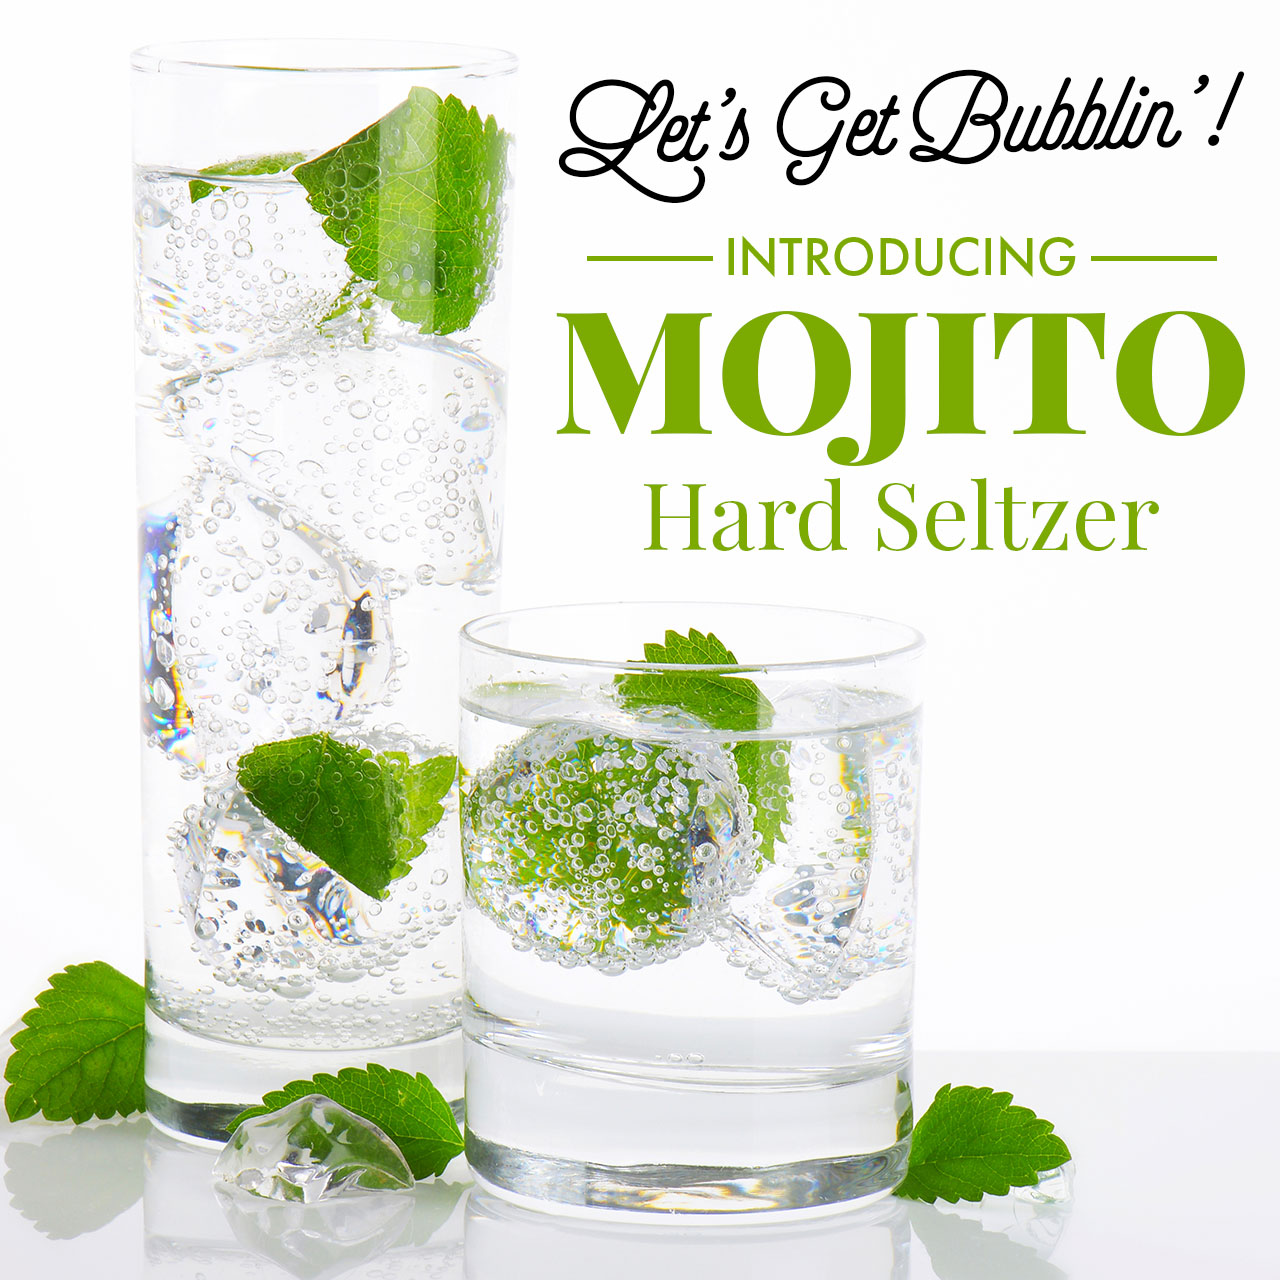 Introducing Mojito Hard Seltzer. Let''s Get Bubblin''!